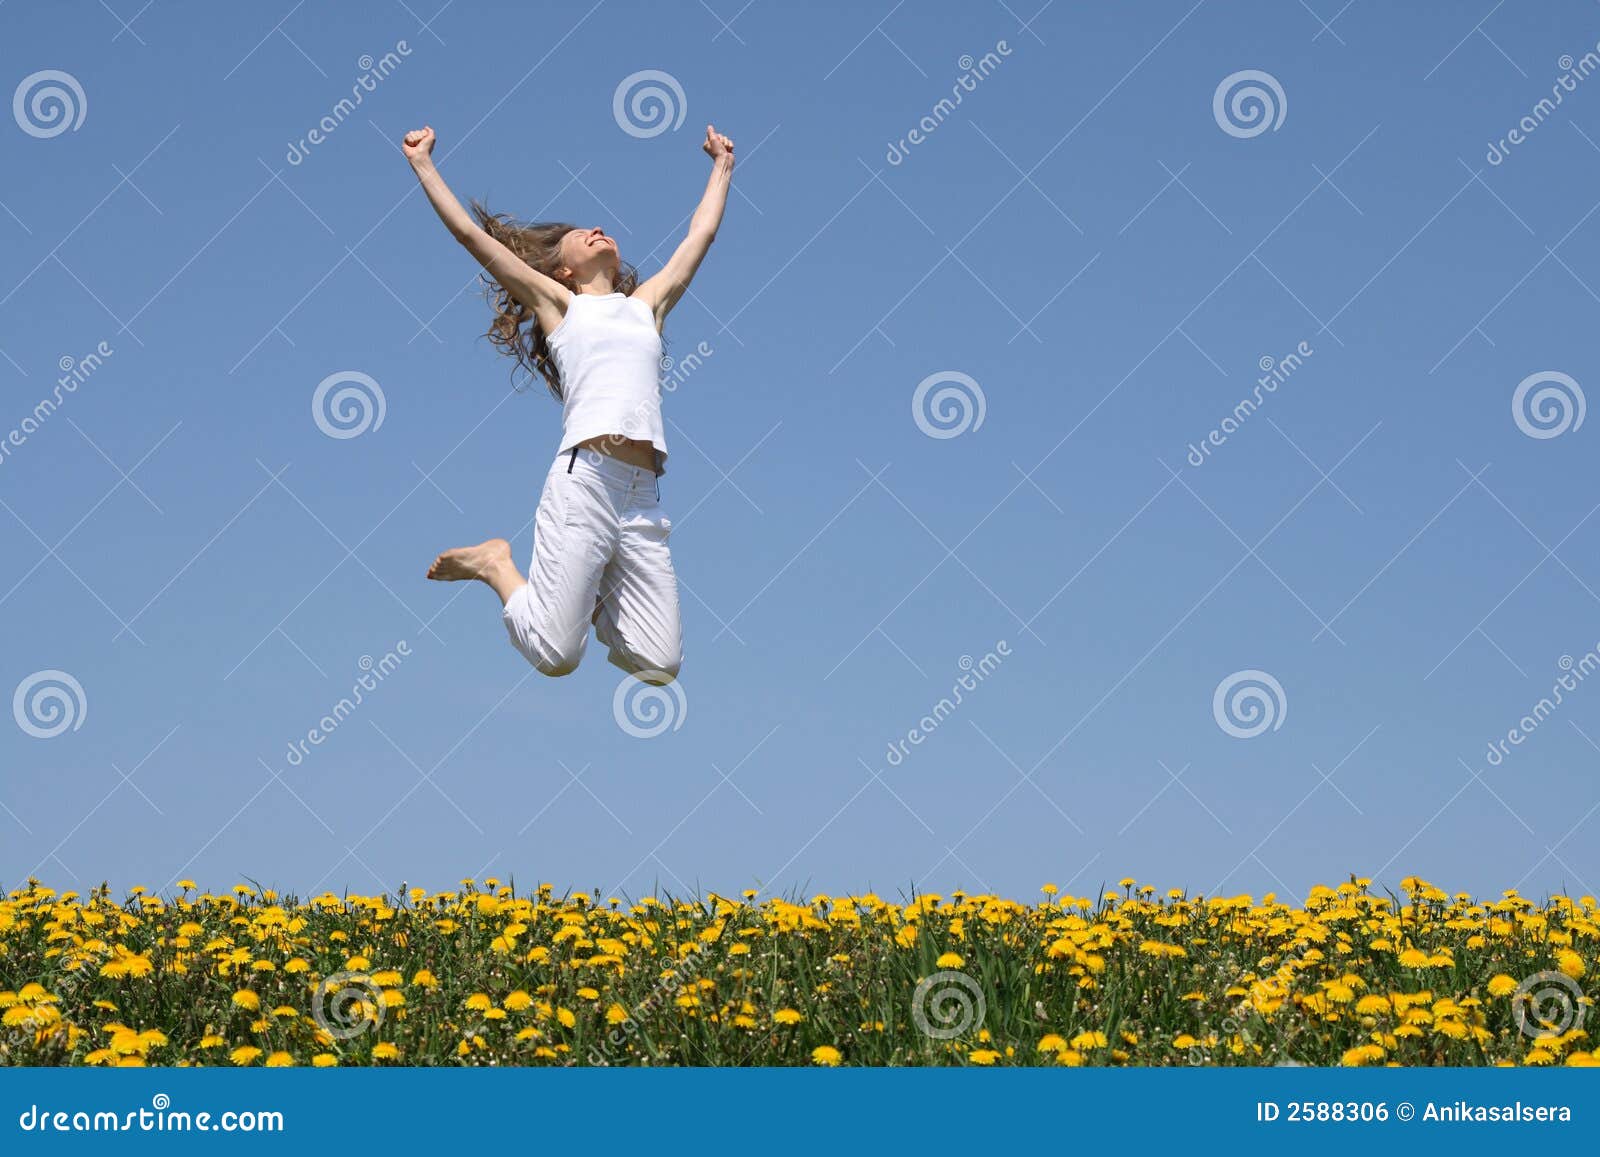 young woman in a happy jump